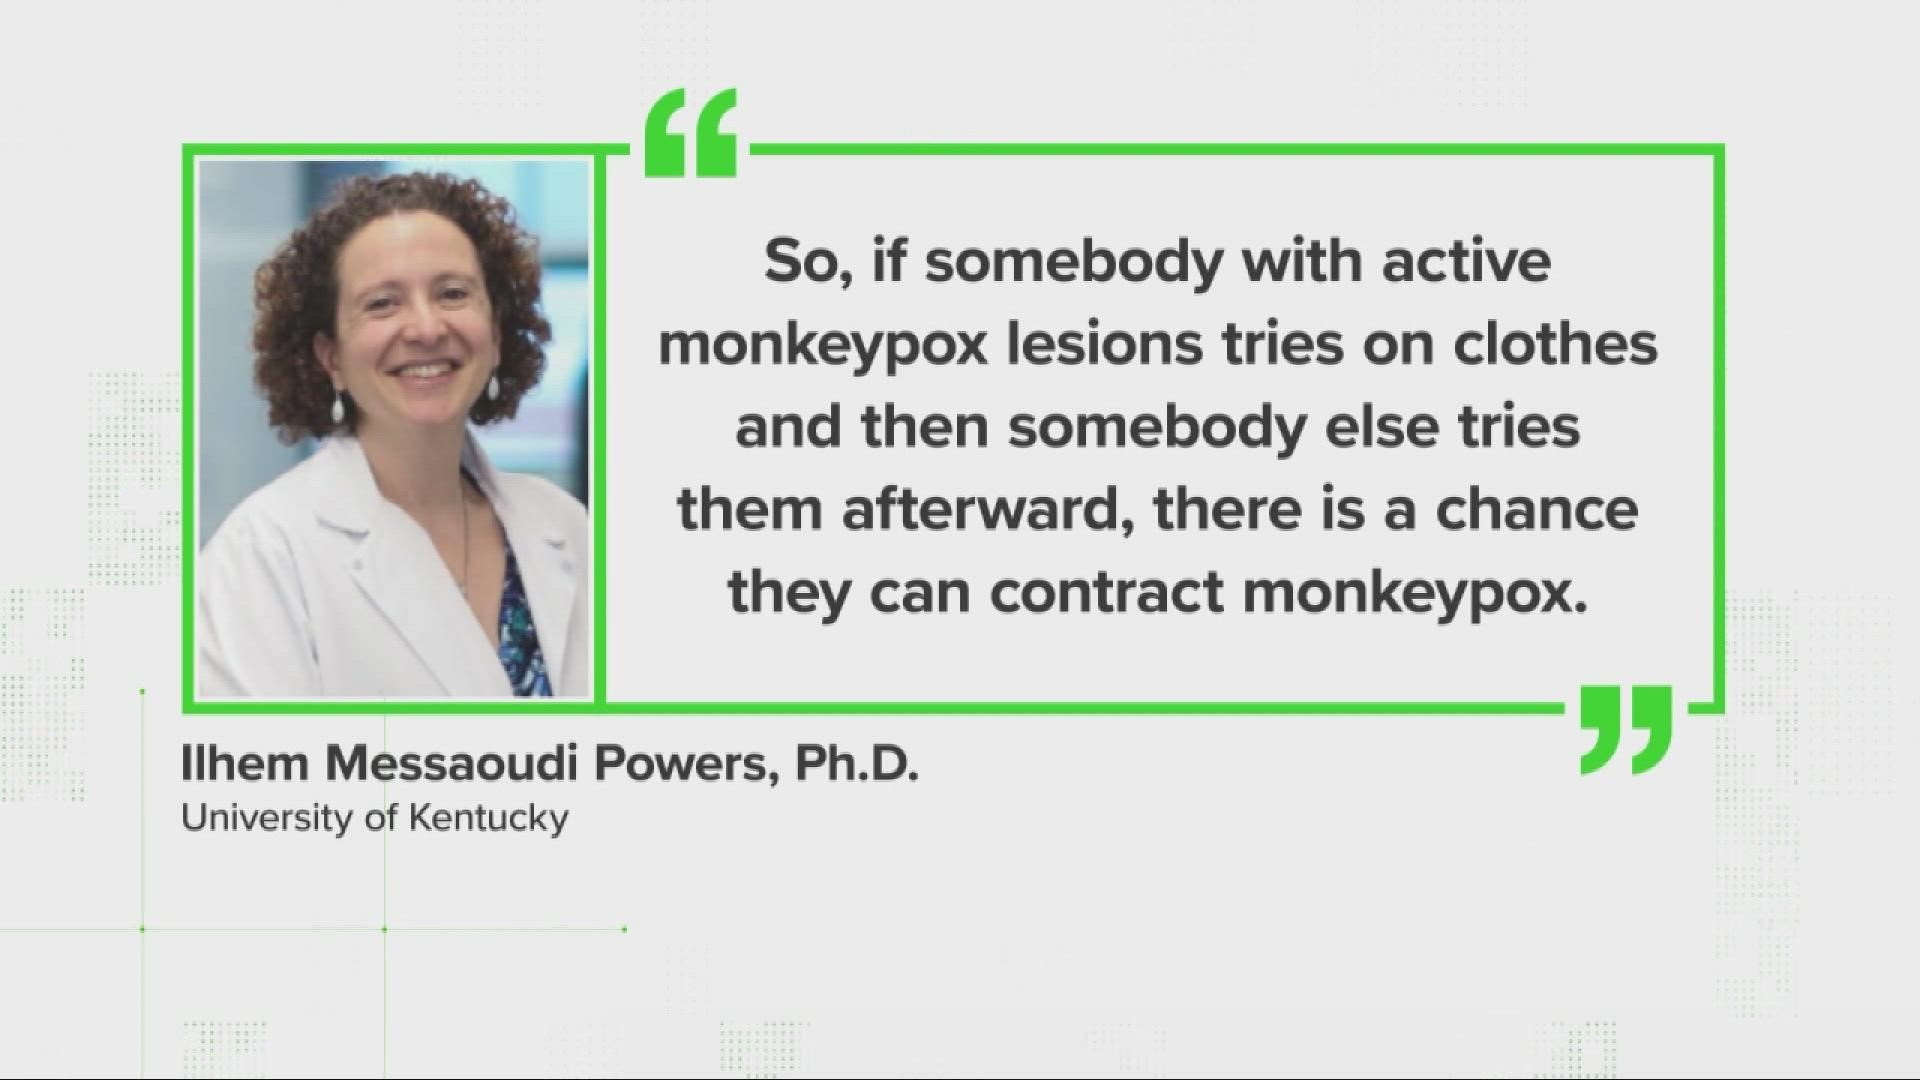 A person can get monkeypox is they have close, personal contact with someone who has symptoms of monkeypox. The virus can spread in fluid or pus from monkeypox sores